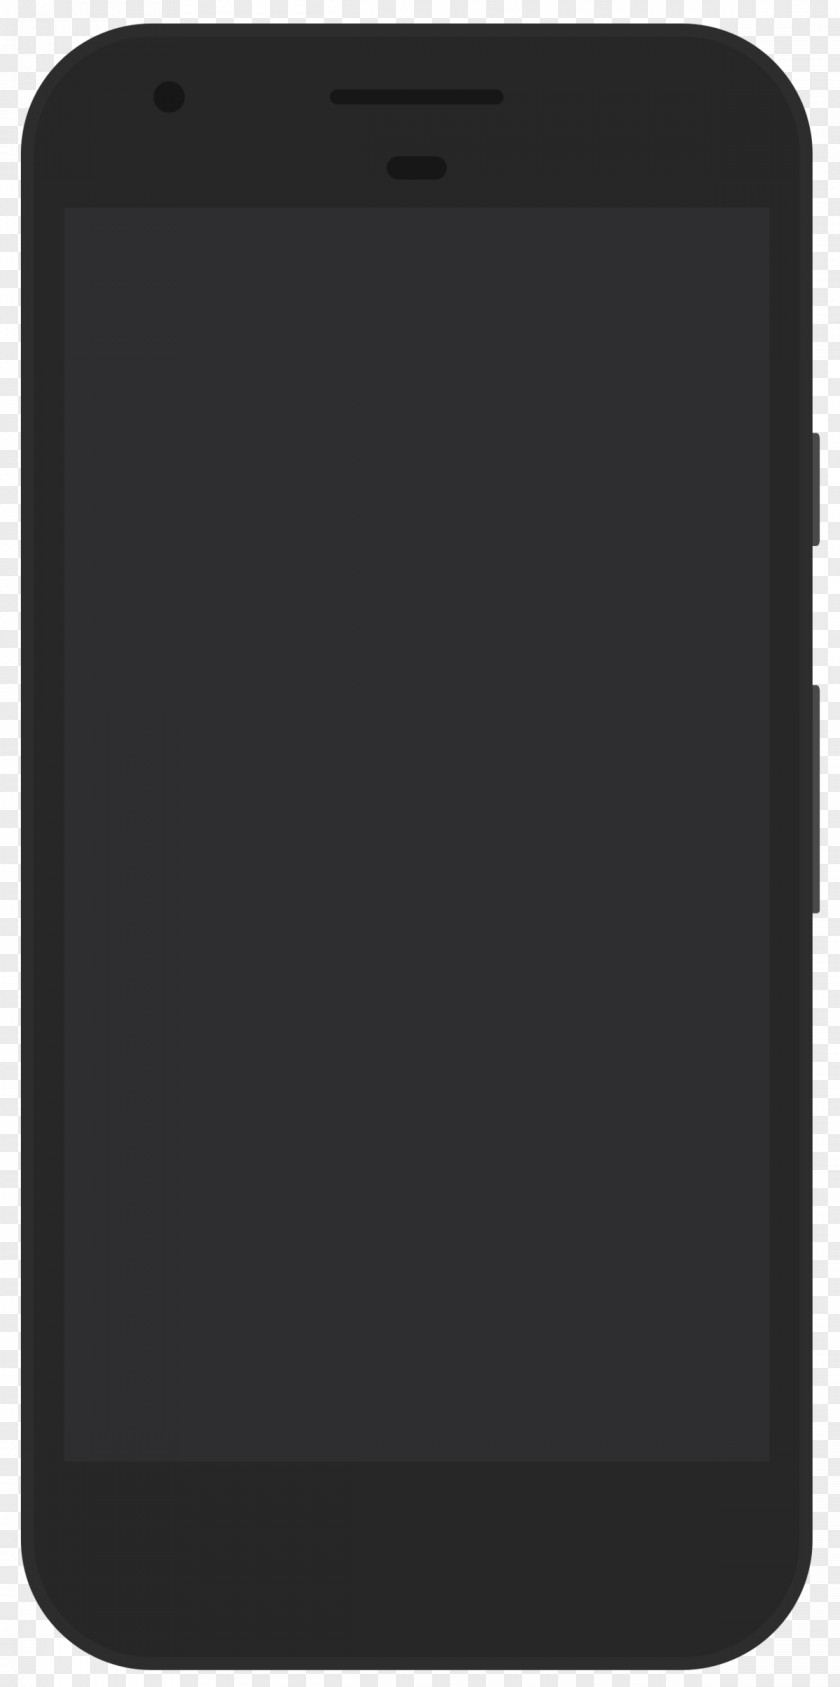 Android Pixel 2 Color OPPO Digital Black PNG